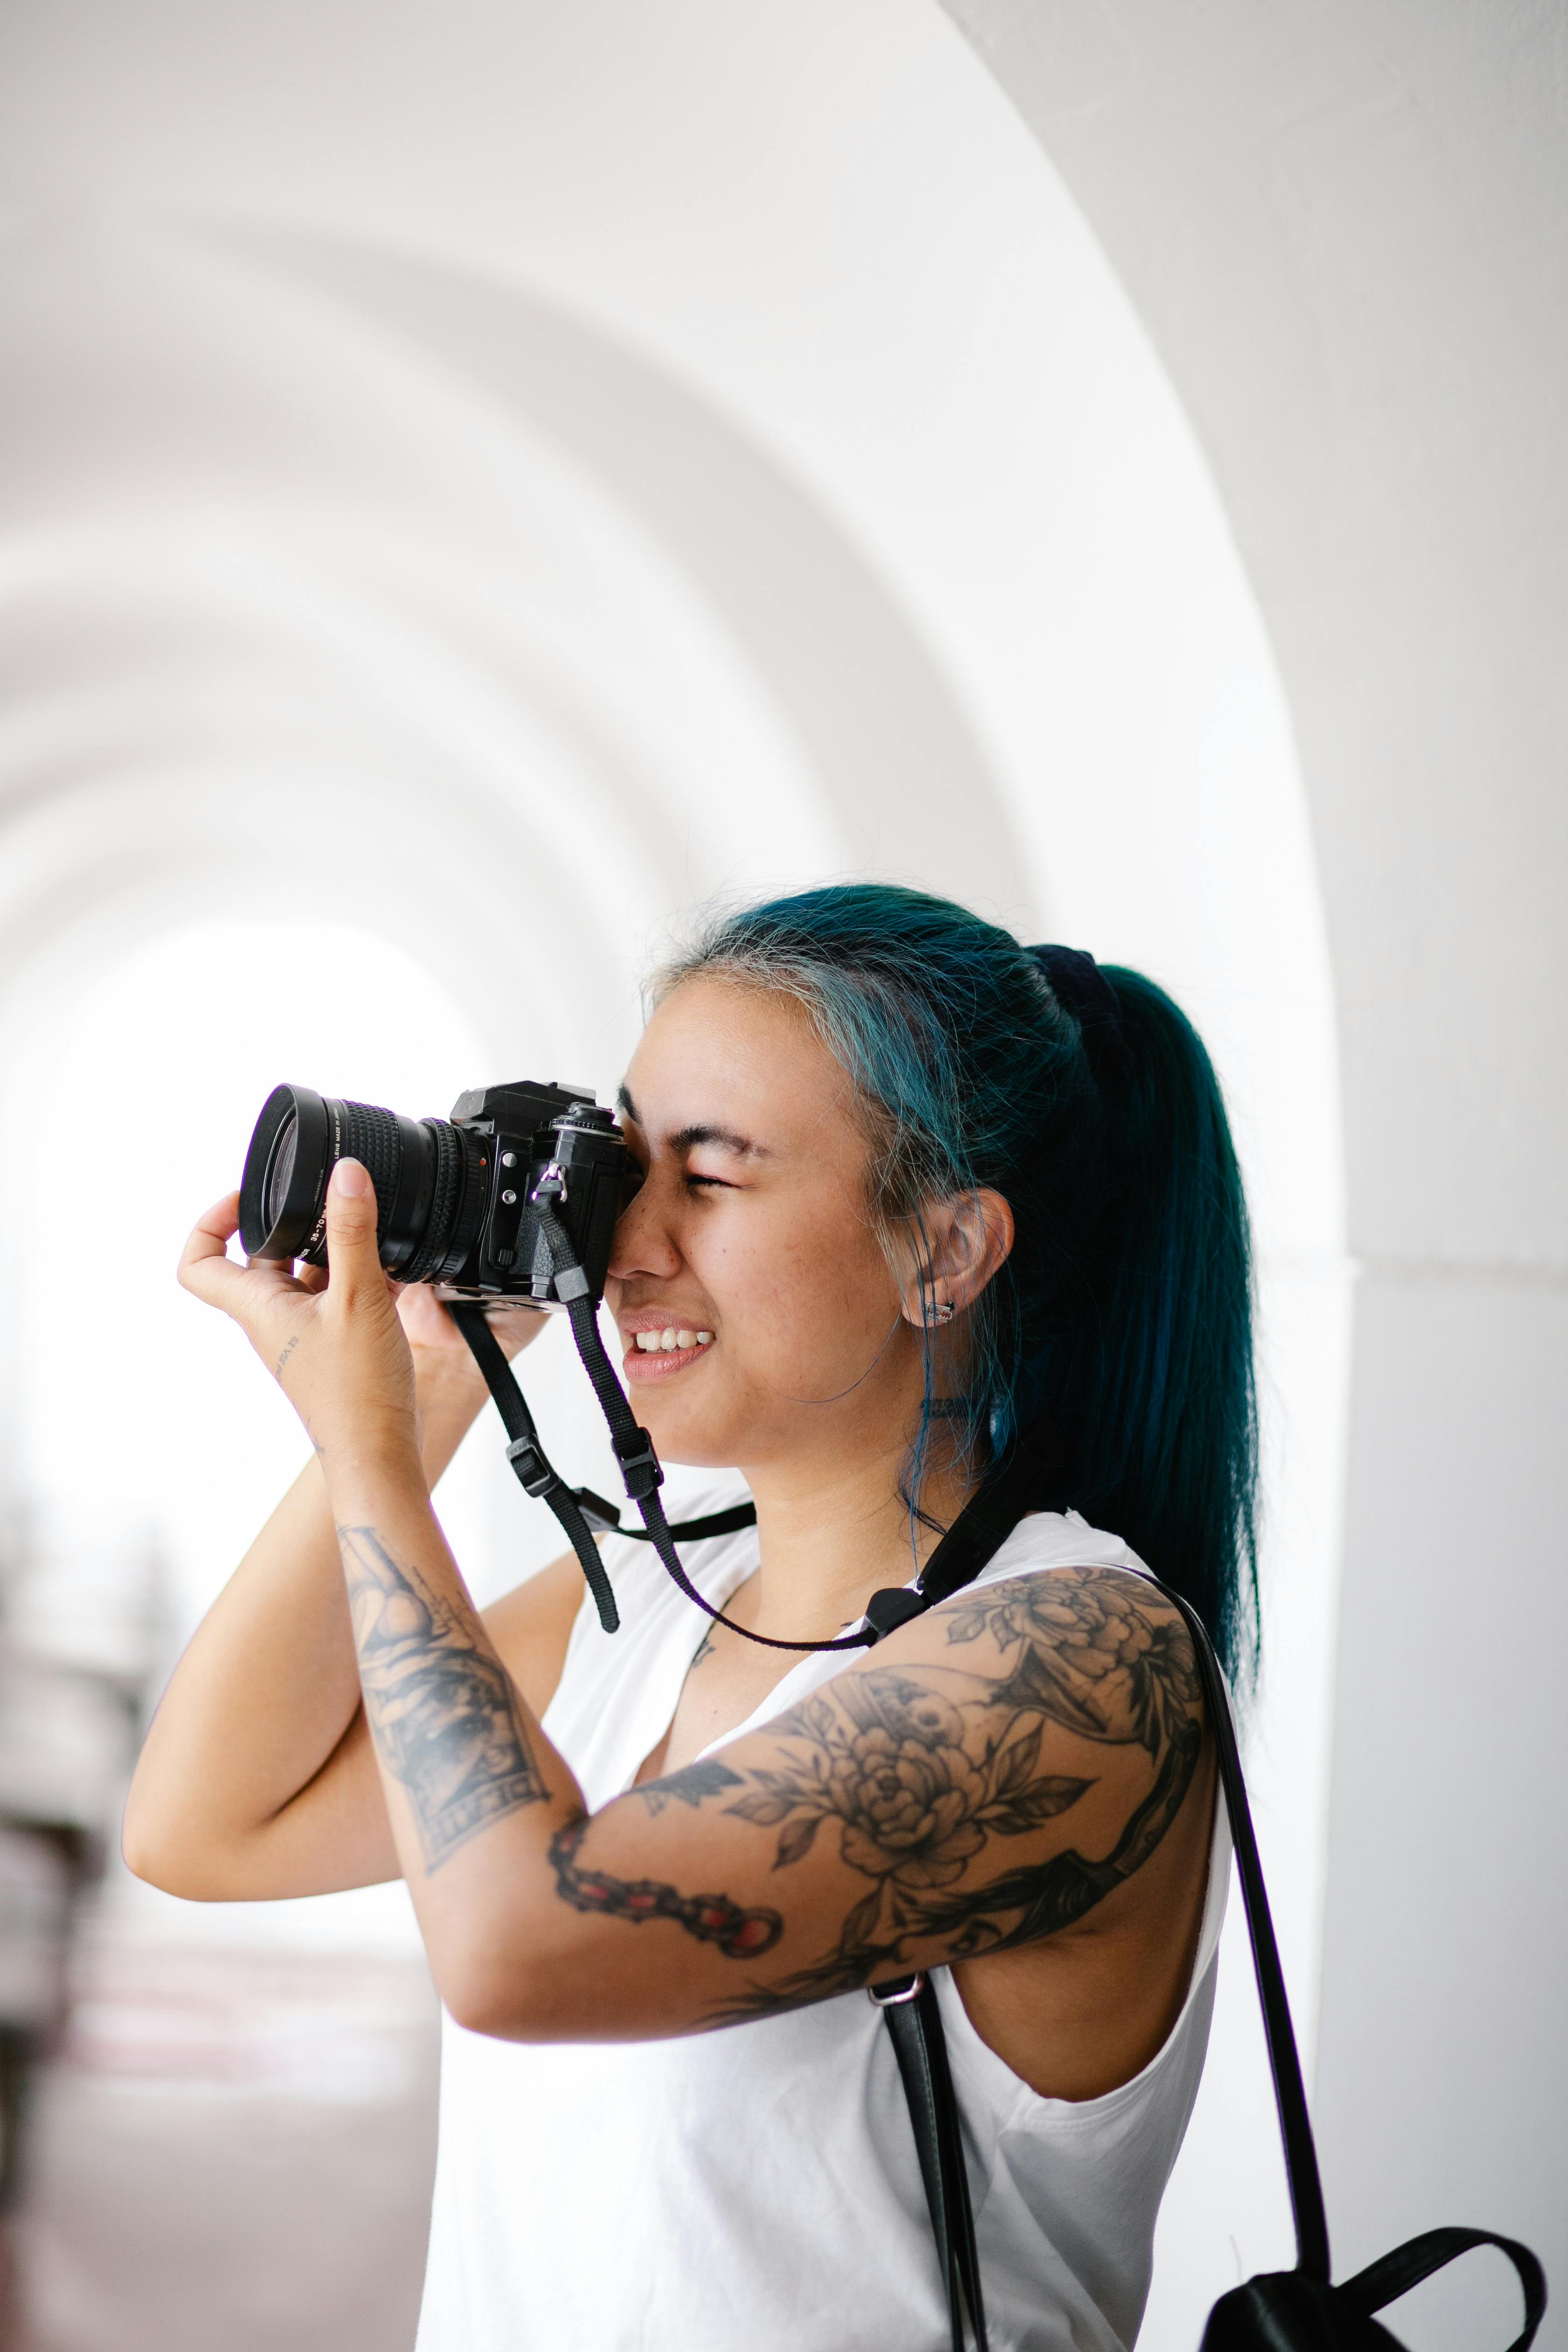 Tattoo Photography: How to Capture the Beauty of Inked Skin